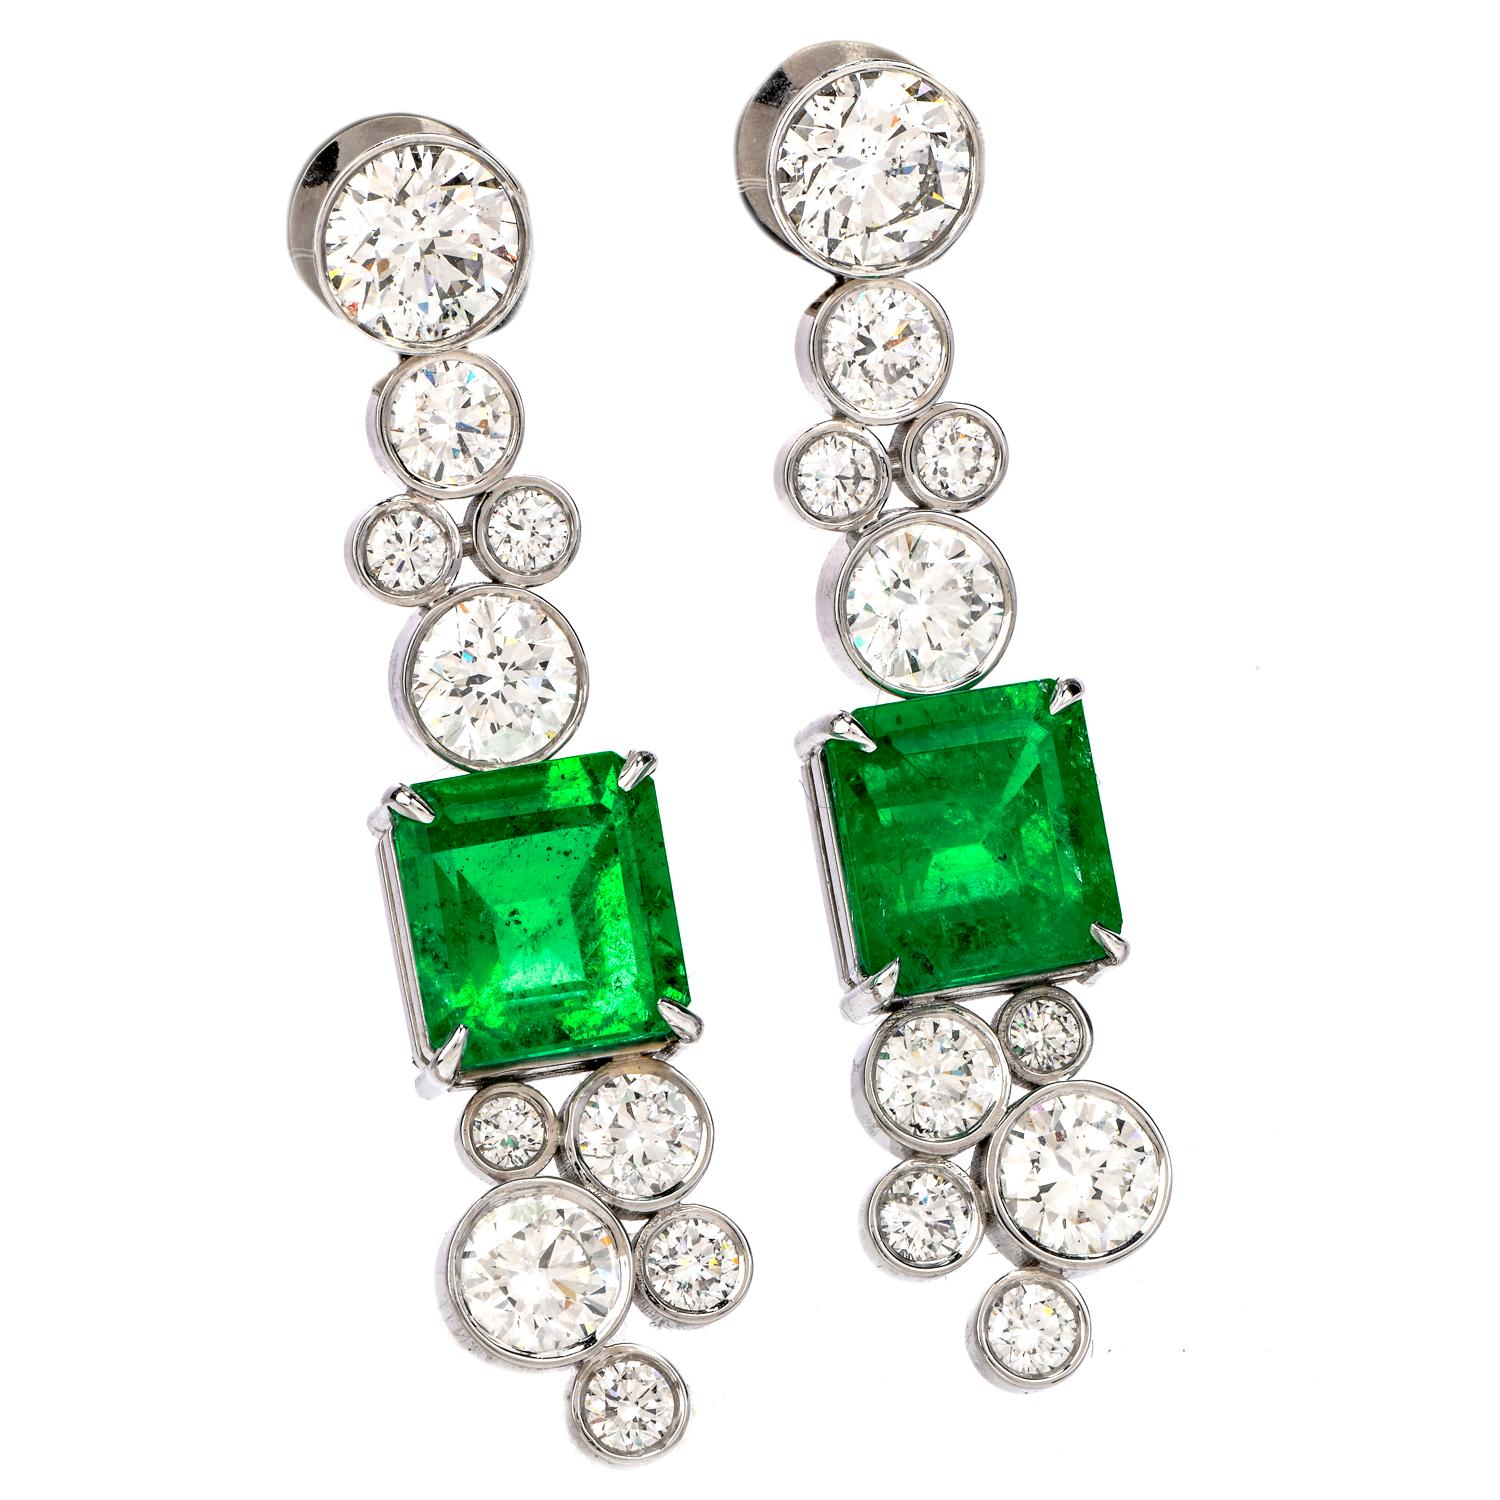 Admire these gorgeous Estate Diamond Colombian Emerald 18K Gold Drop Earrings! 

These dangle drop earrings are crafted in 18 karat white gold. They display two bright genuine Colombian emeralds, square Assher cut, prong set, approximately 5.23